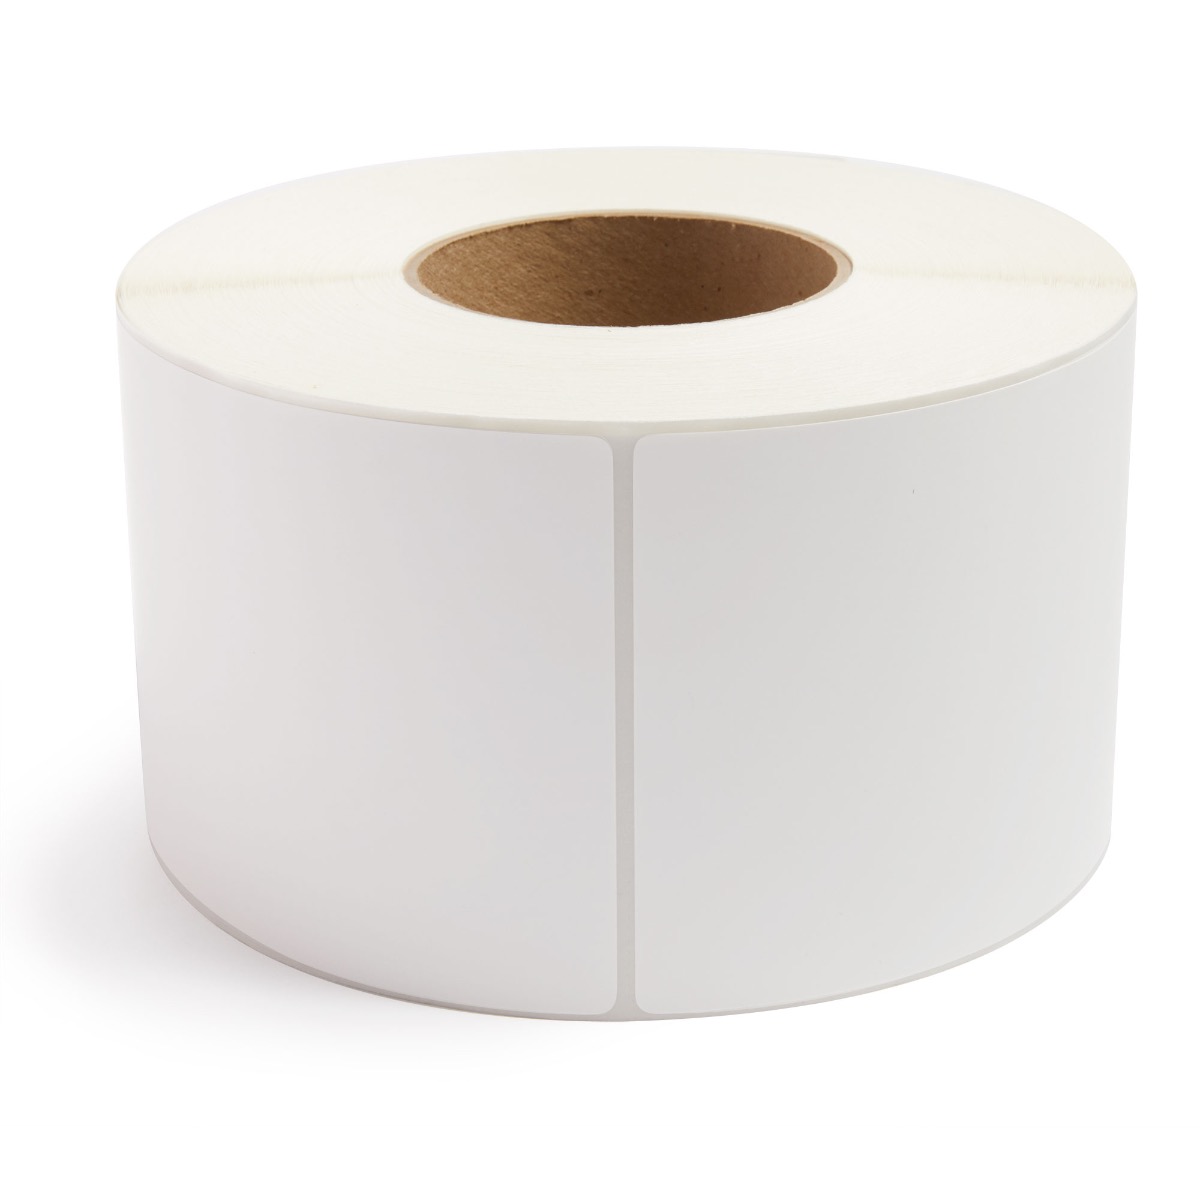 4 rolls 50 x 25mm Direct Thermal Labels 25mm core 1,000 per roll 